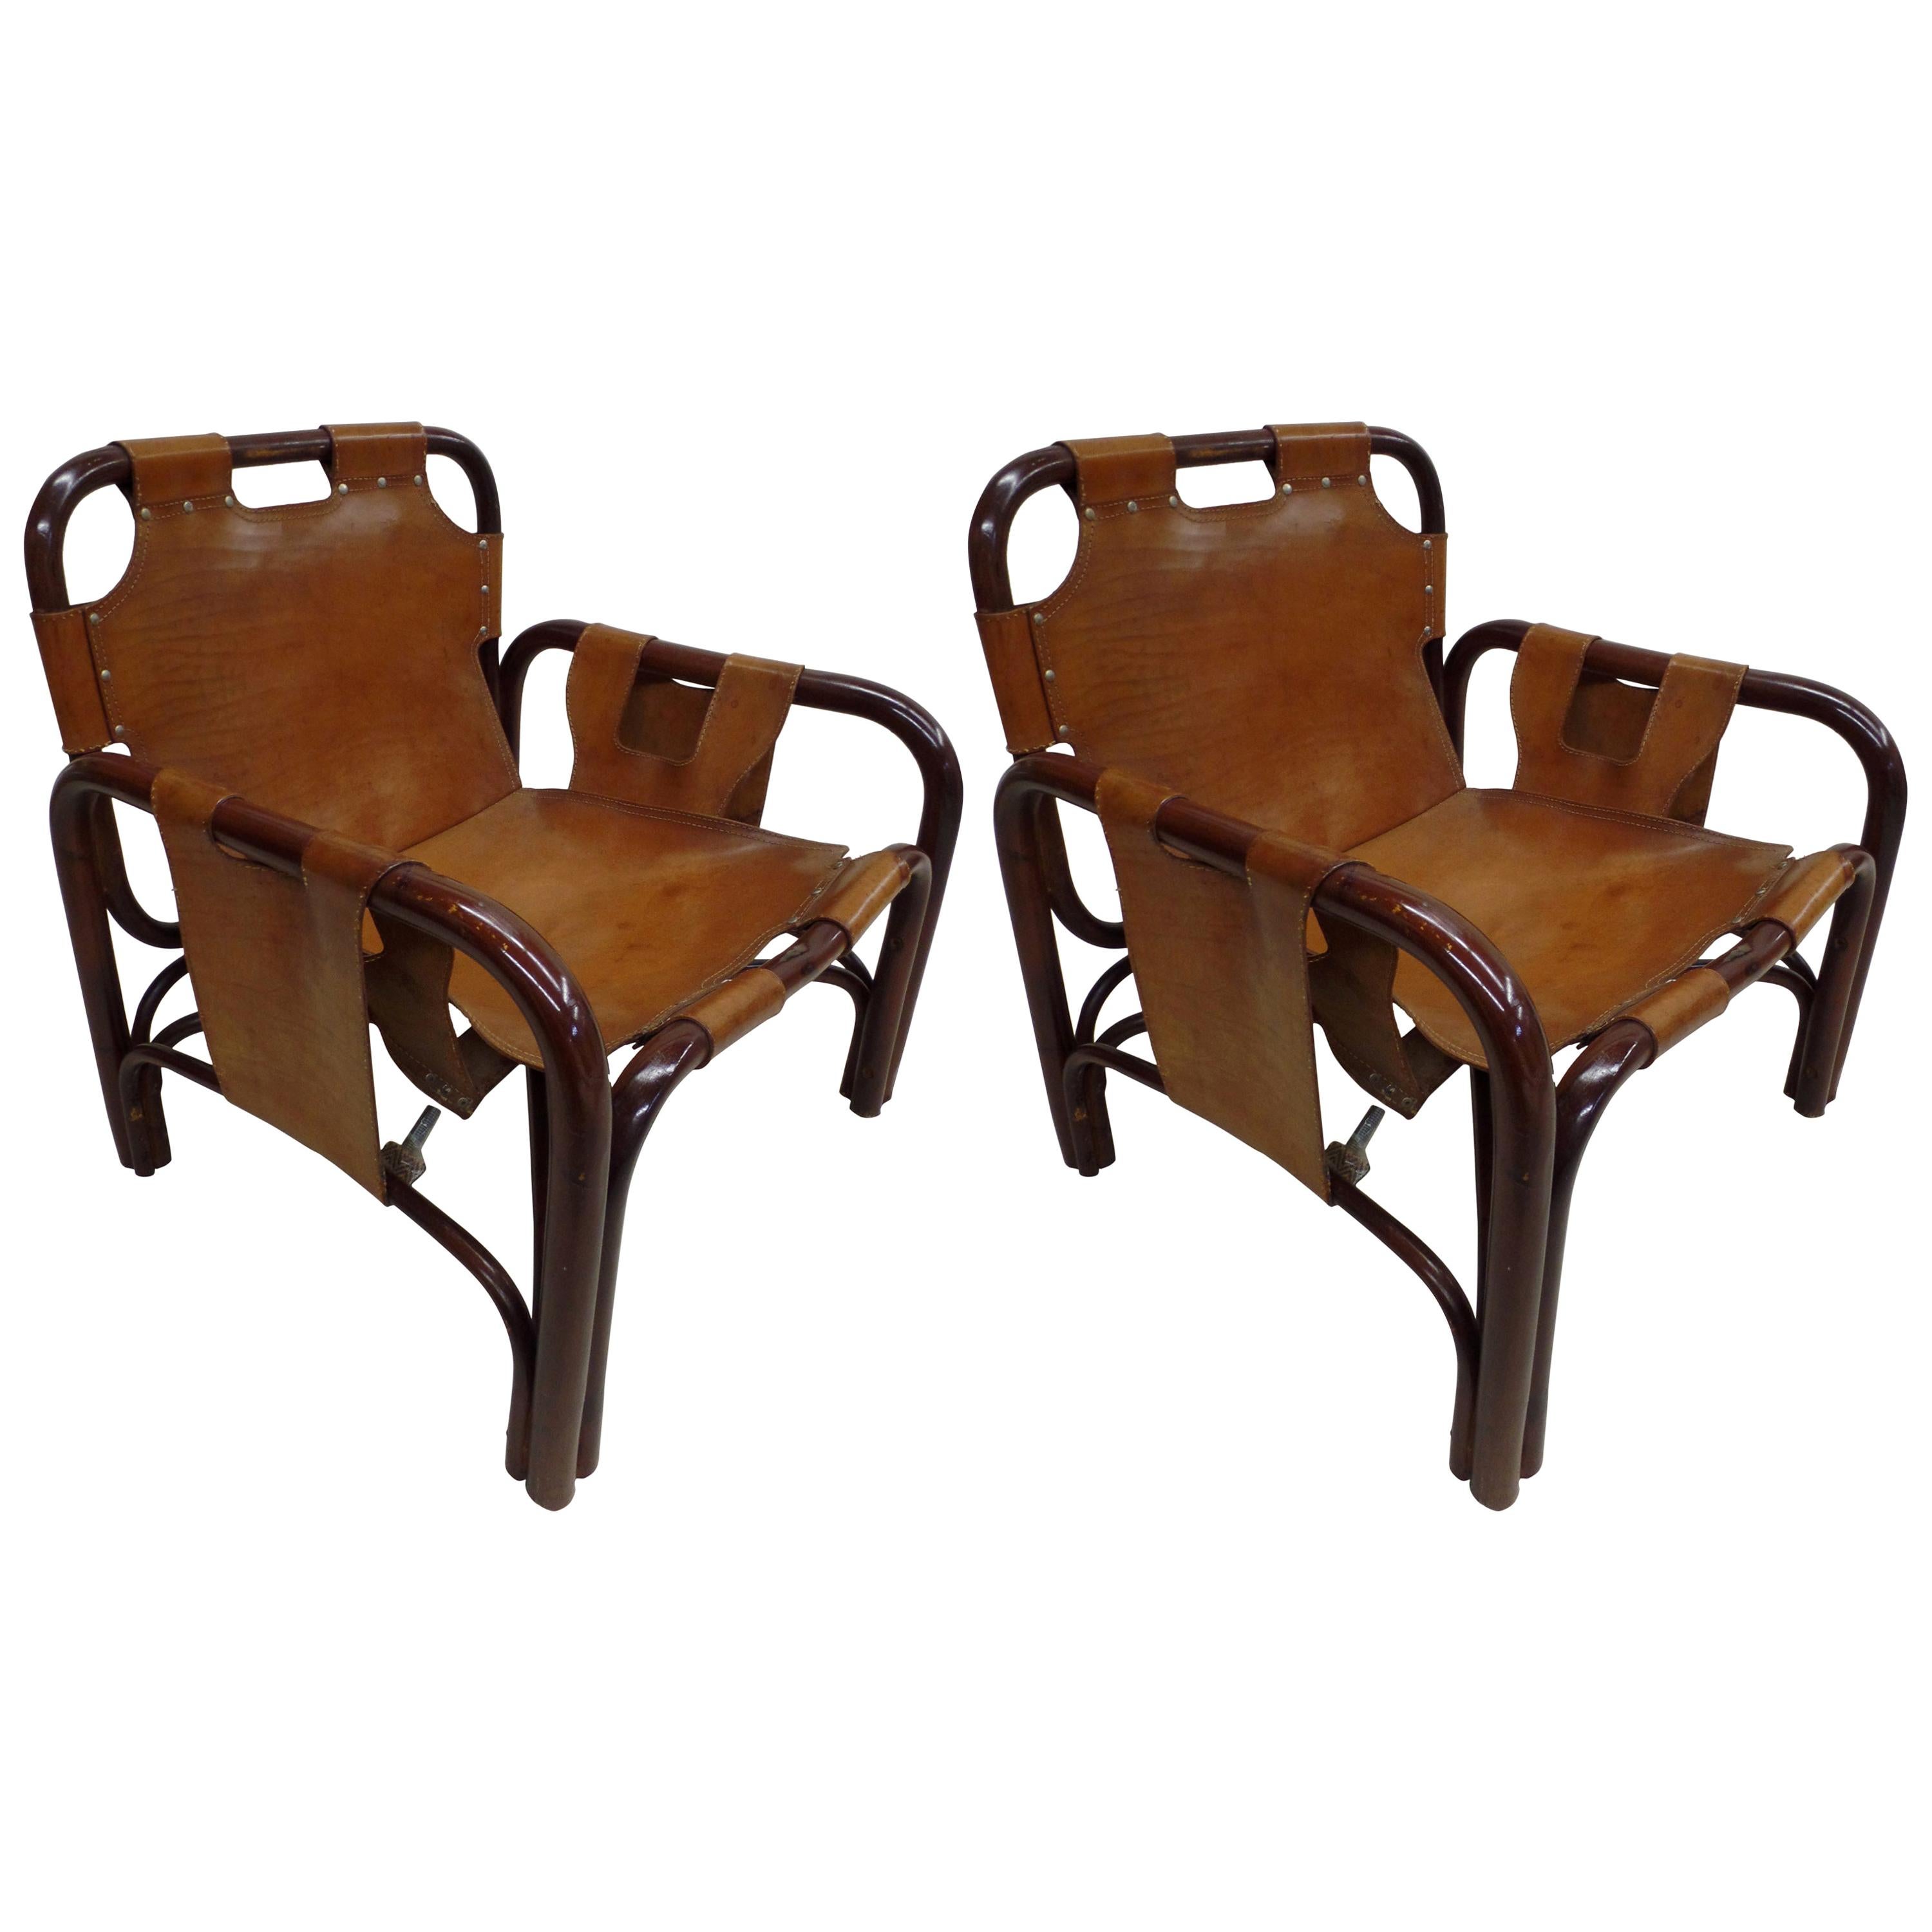 Pair of Italian Mid-Century Modern Rattan and Leather Lounge Chairs by Bonacina